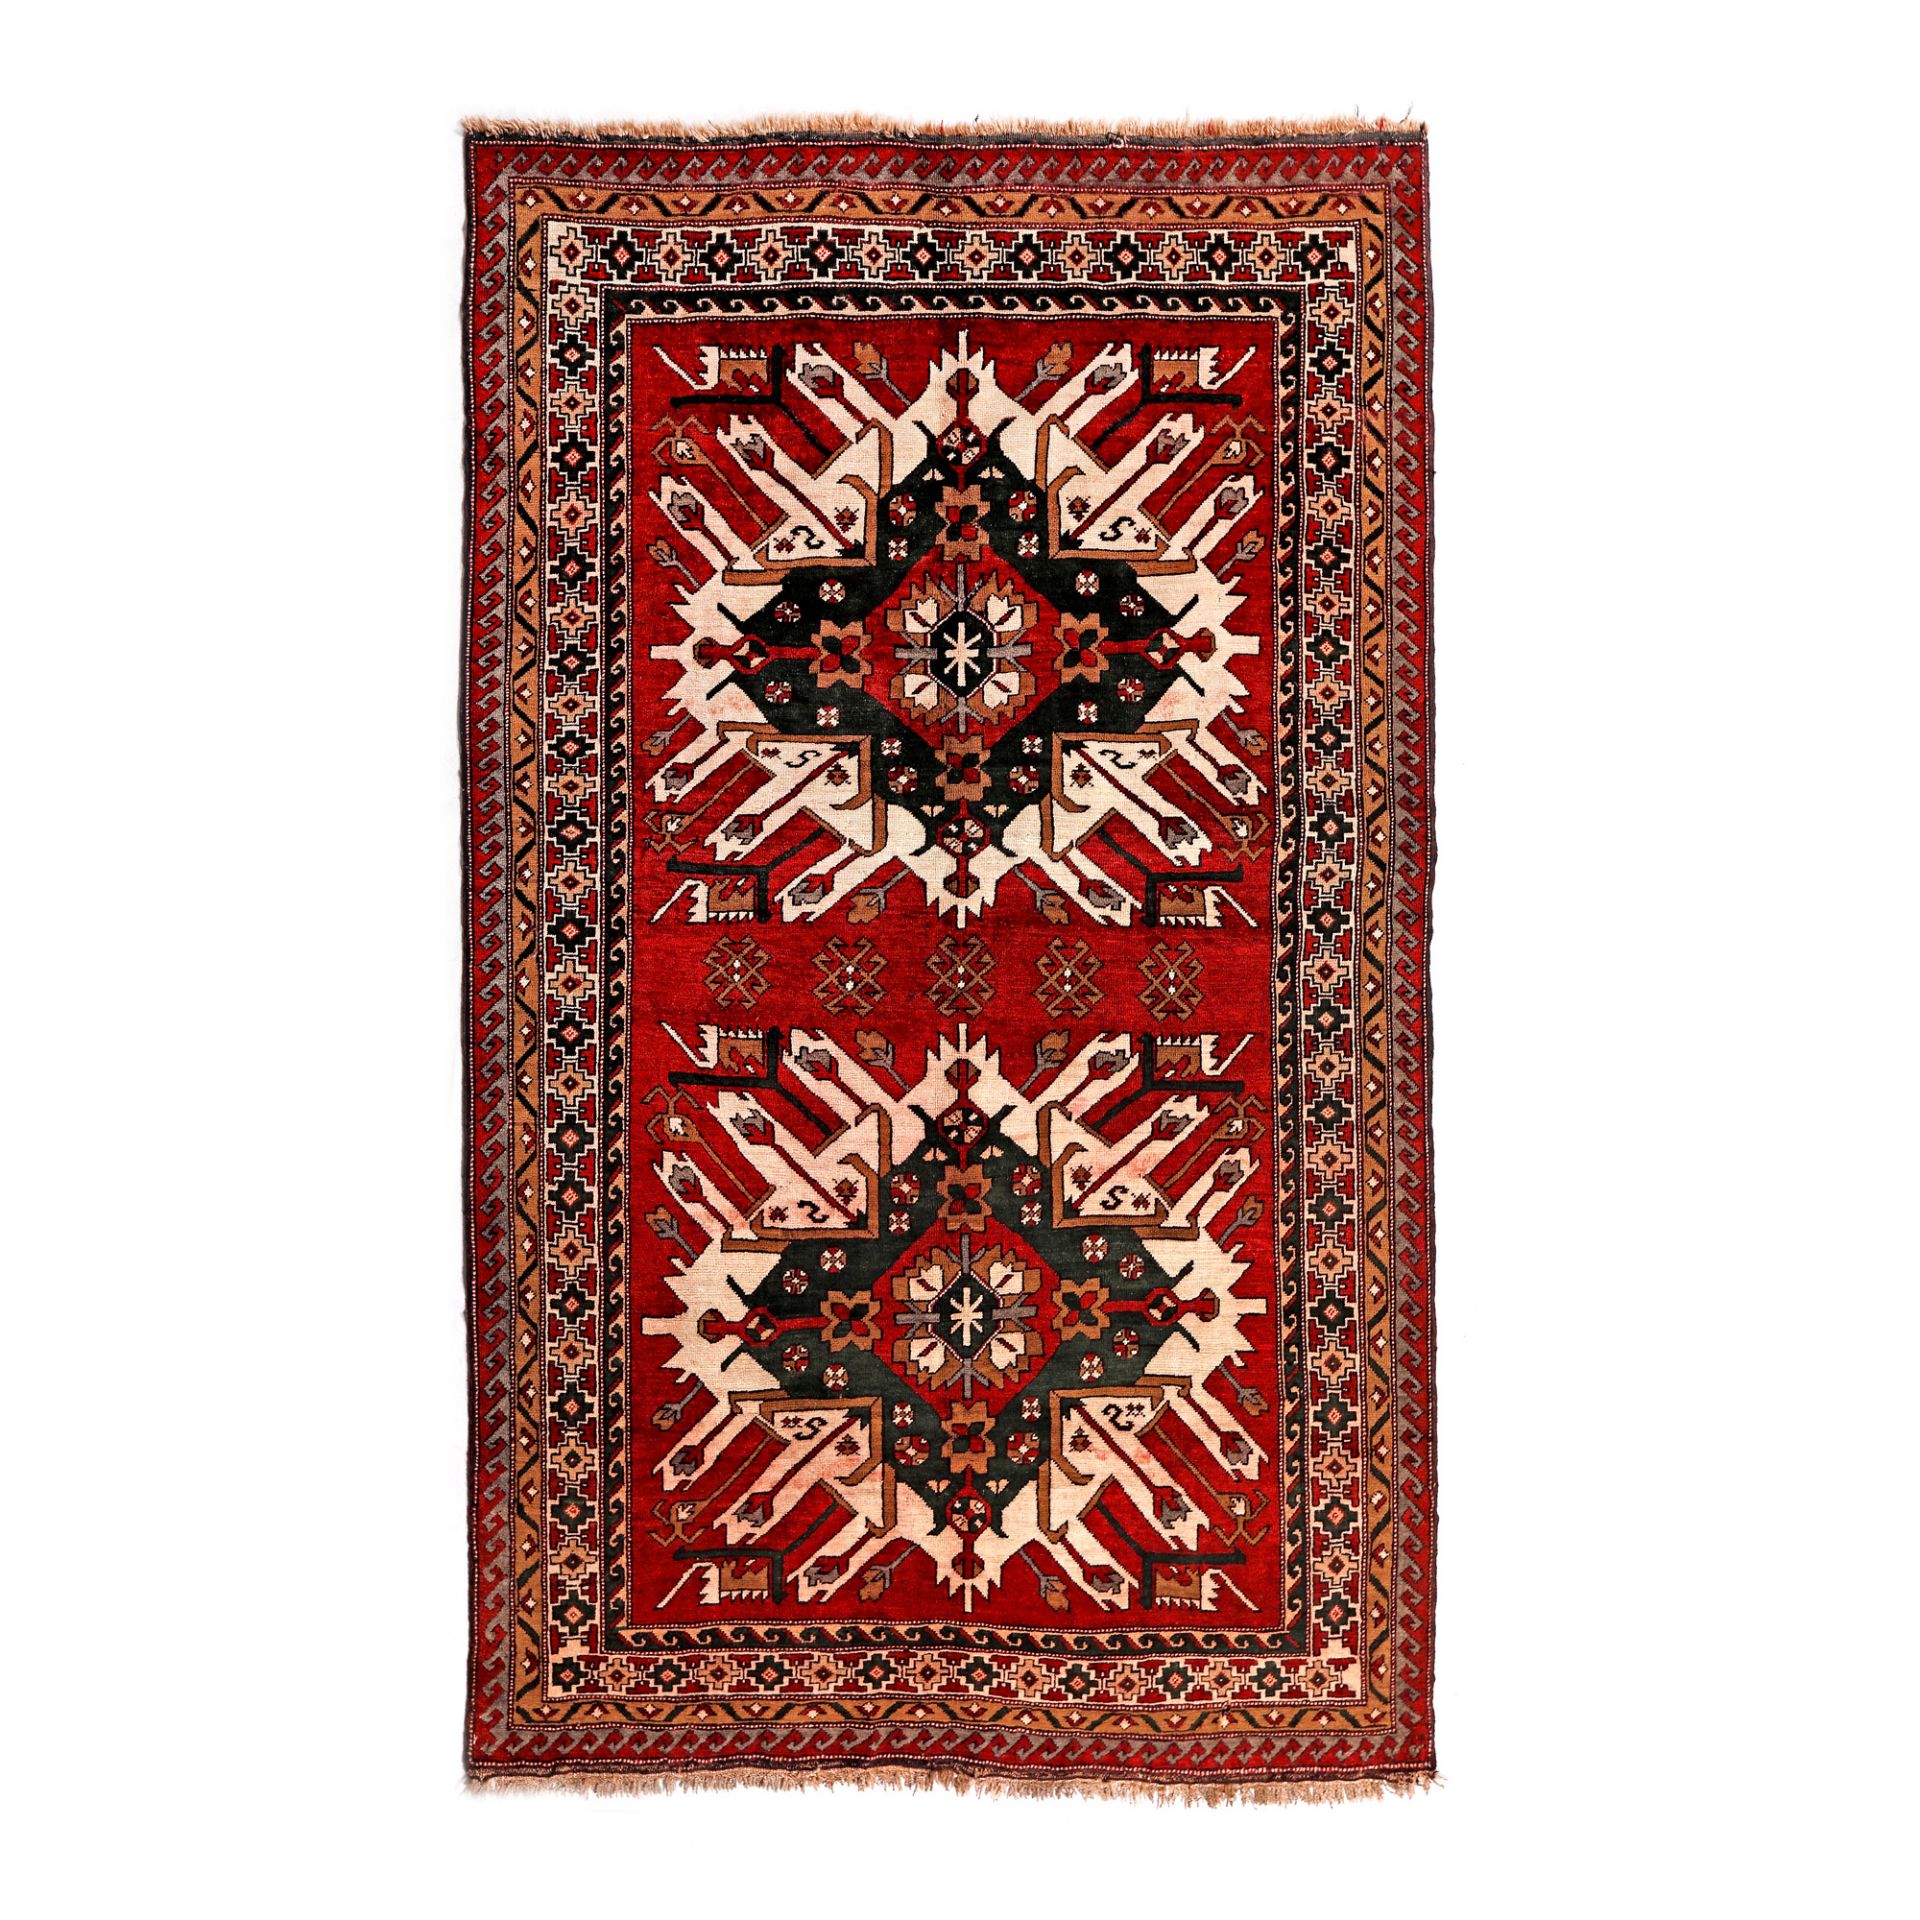 Kars wool rug, decorated with two symmetrical medallions, eastern Turkey